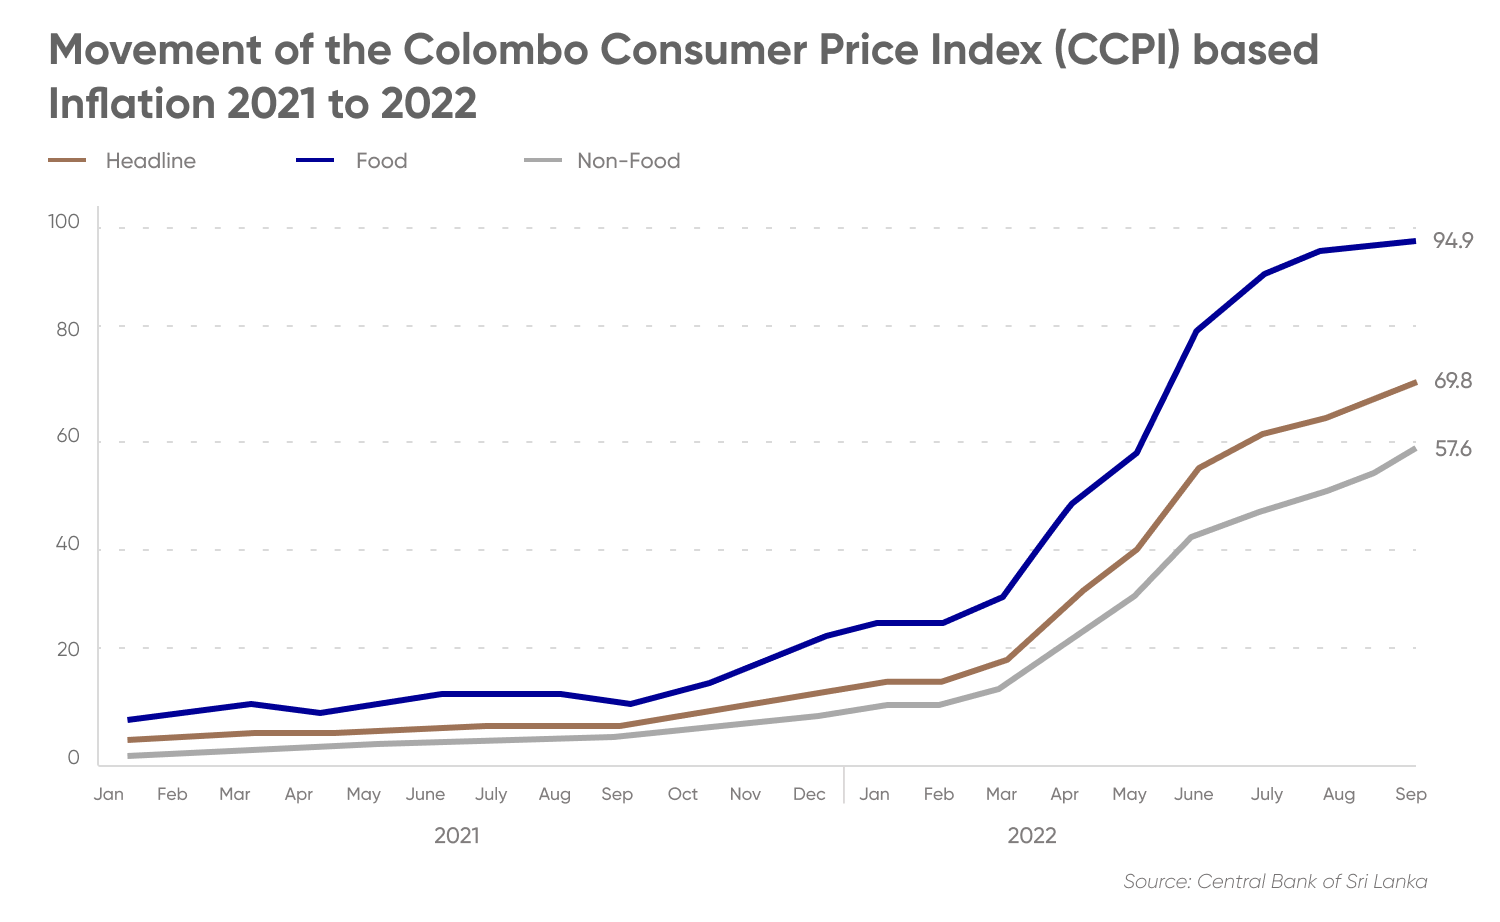 A graph of CCPI based on inflation